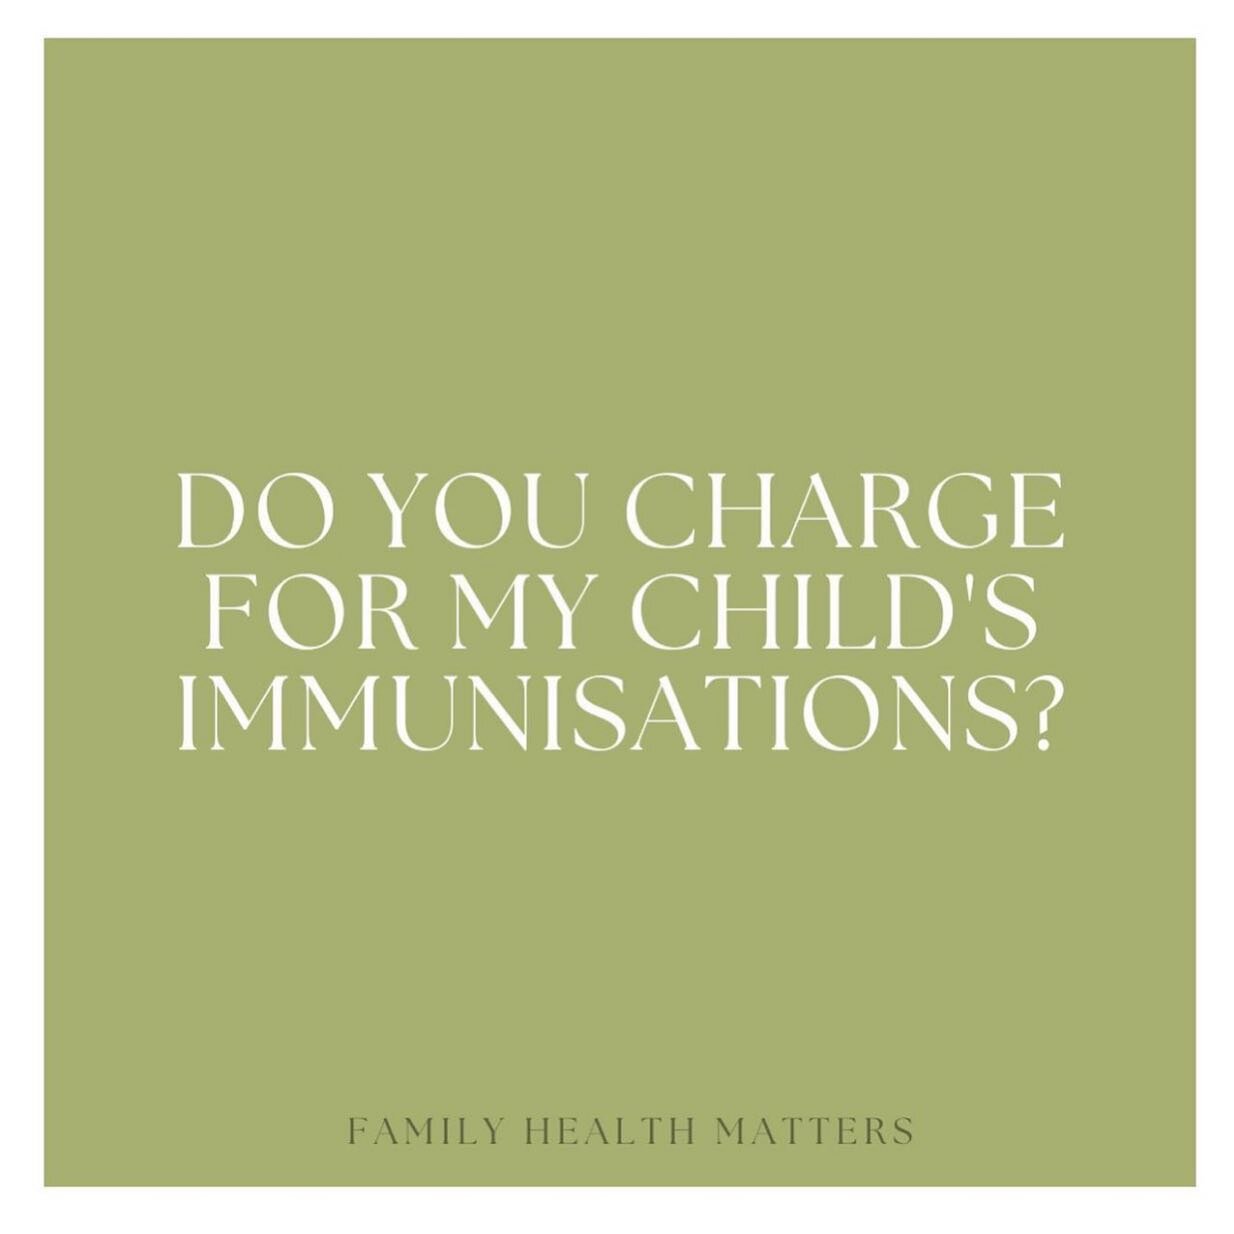 No, we don&rsquo;t charge for immunisations on the National Immunisation Schedule and these are FREE of charge before the age of 18 for all NZ residents and visiting children.  If your child has not yet received the whooping cough vaccine or other va